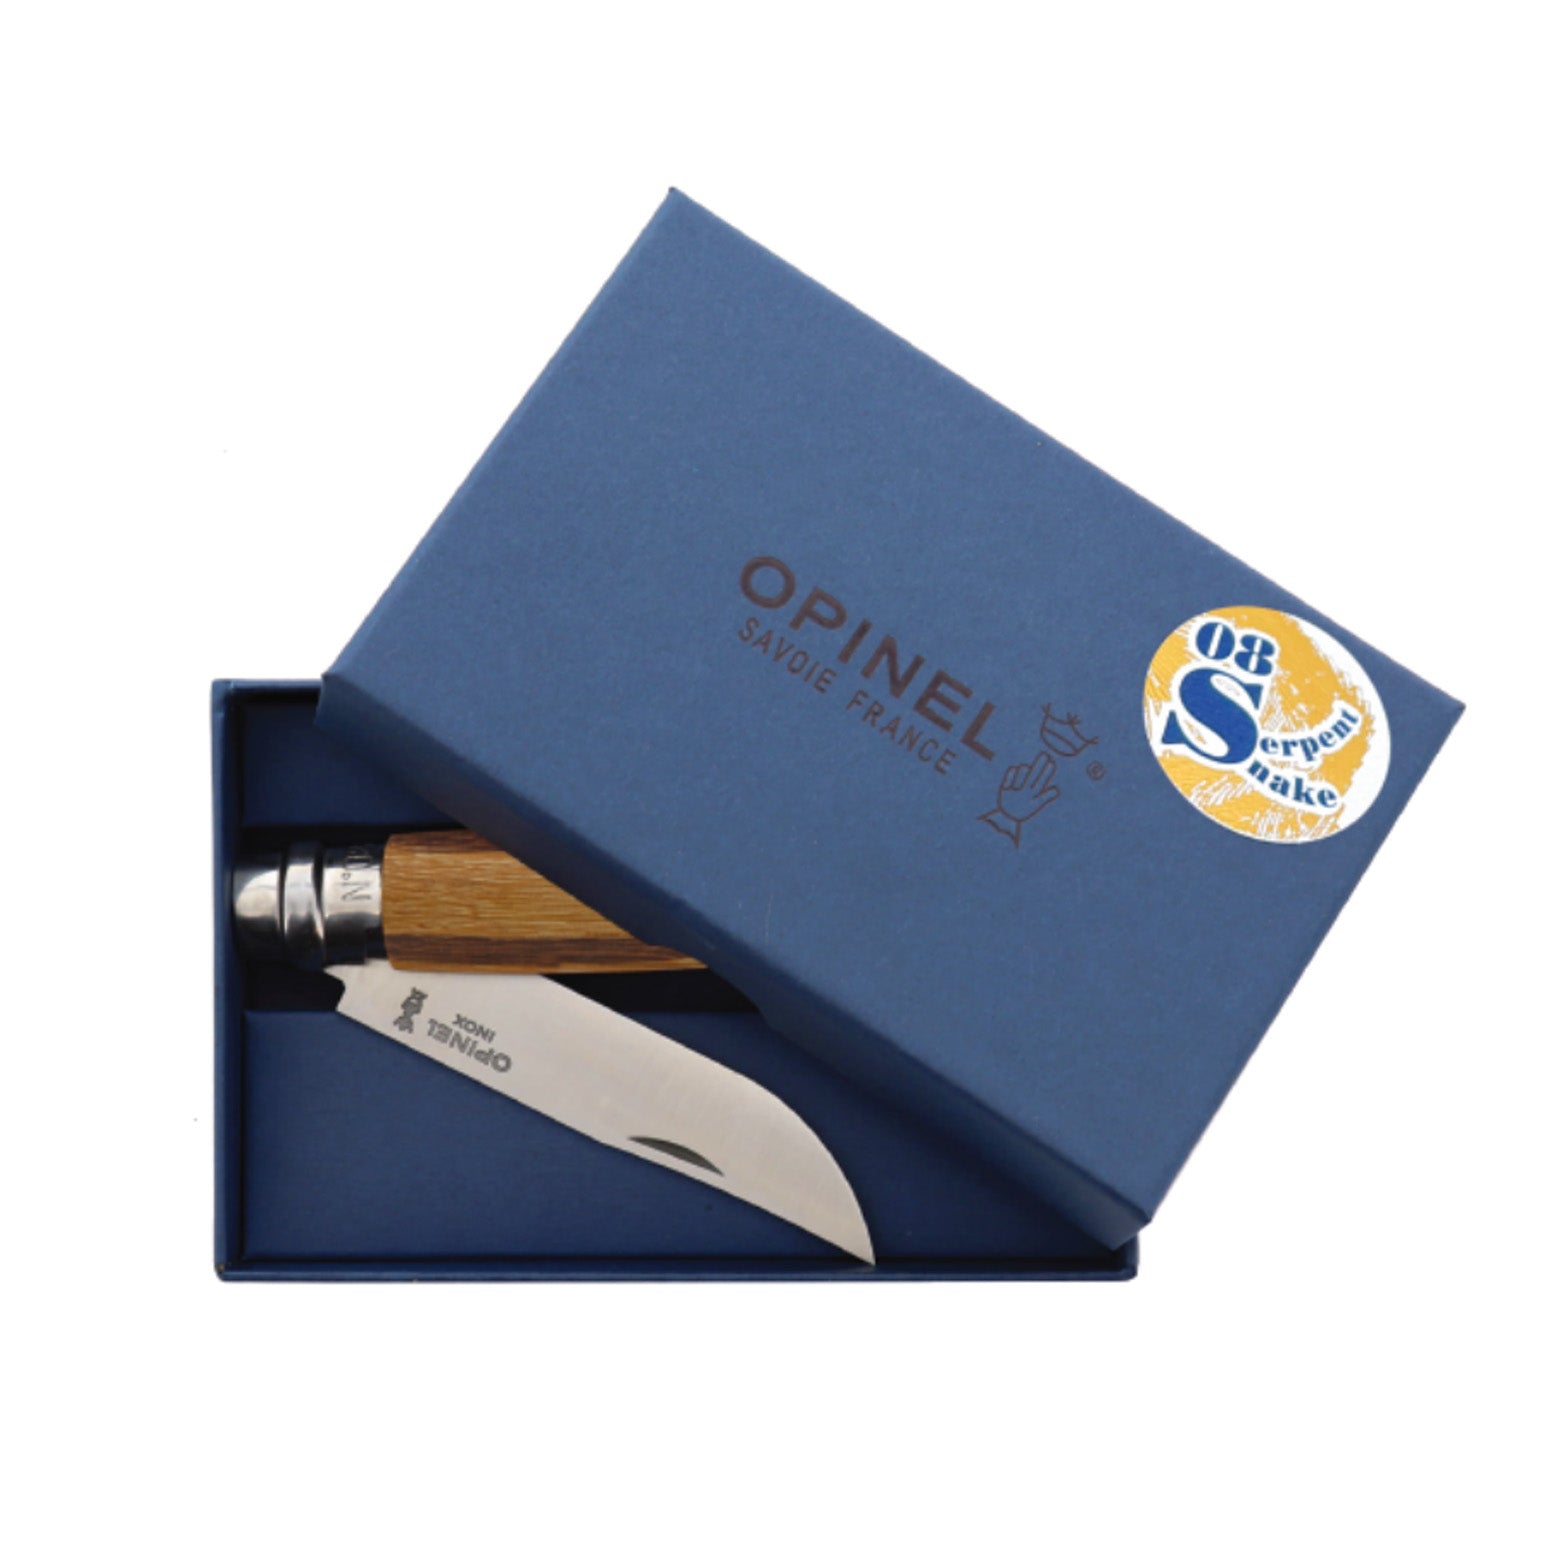 Opinel Nº8 CHIEN Wood Size TU Color WOOD